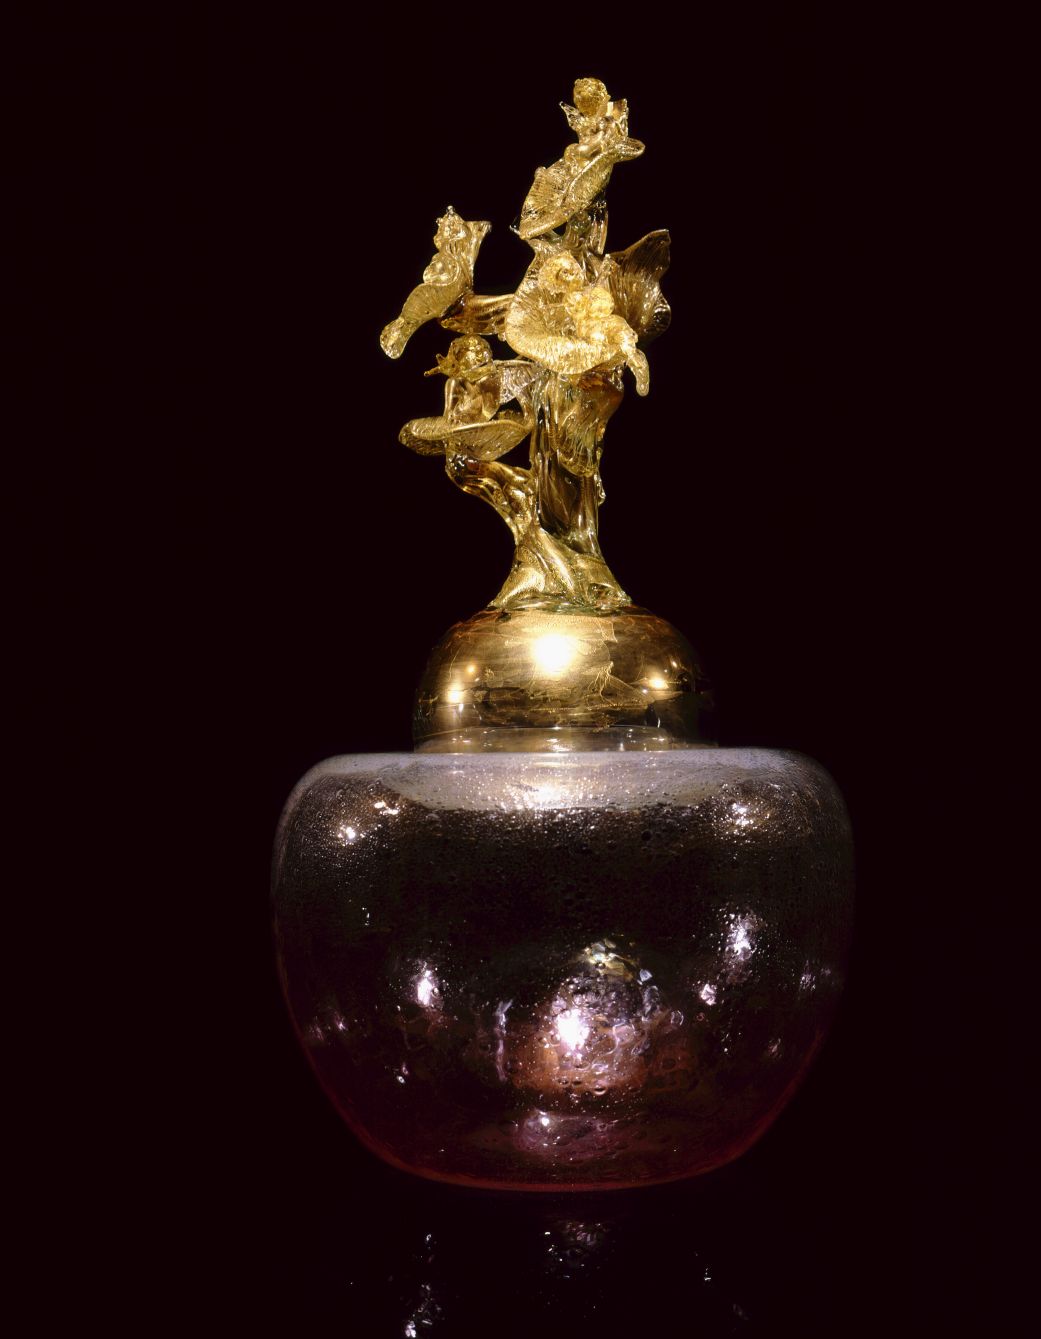  Dale Chihuly,&nbsp; Stopper (Putti and the Tree)&nbsp; (1994-1997, glass, 40 x 20 1/2 x 21 1/2 inches) 